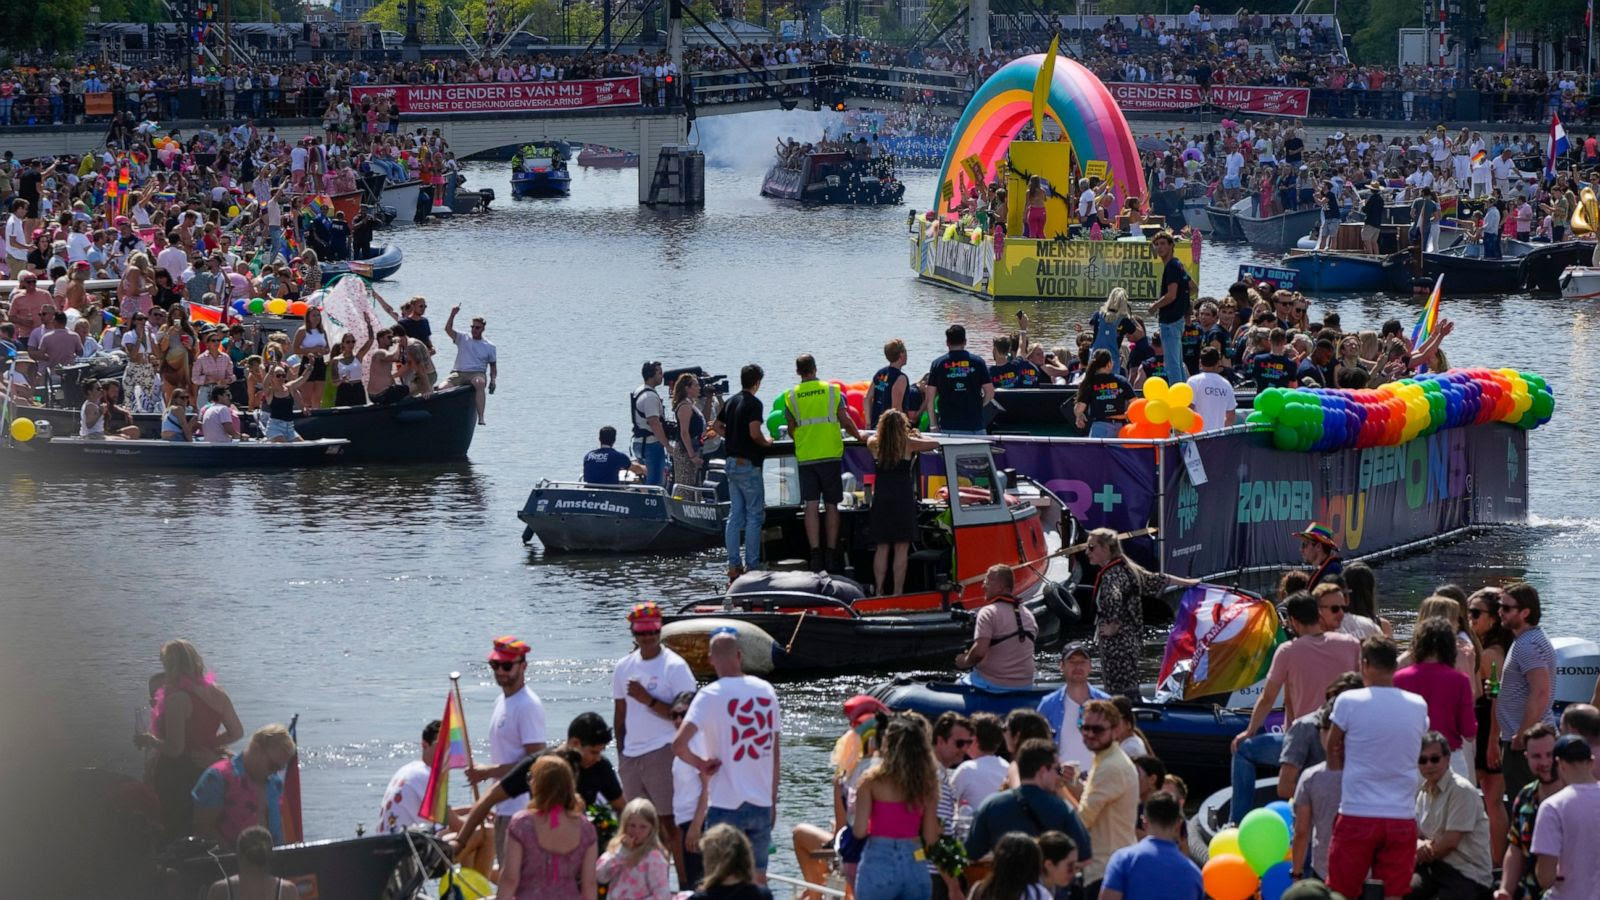 Pride on the canal: Huge crowds at Amsterdam water parade